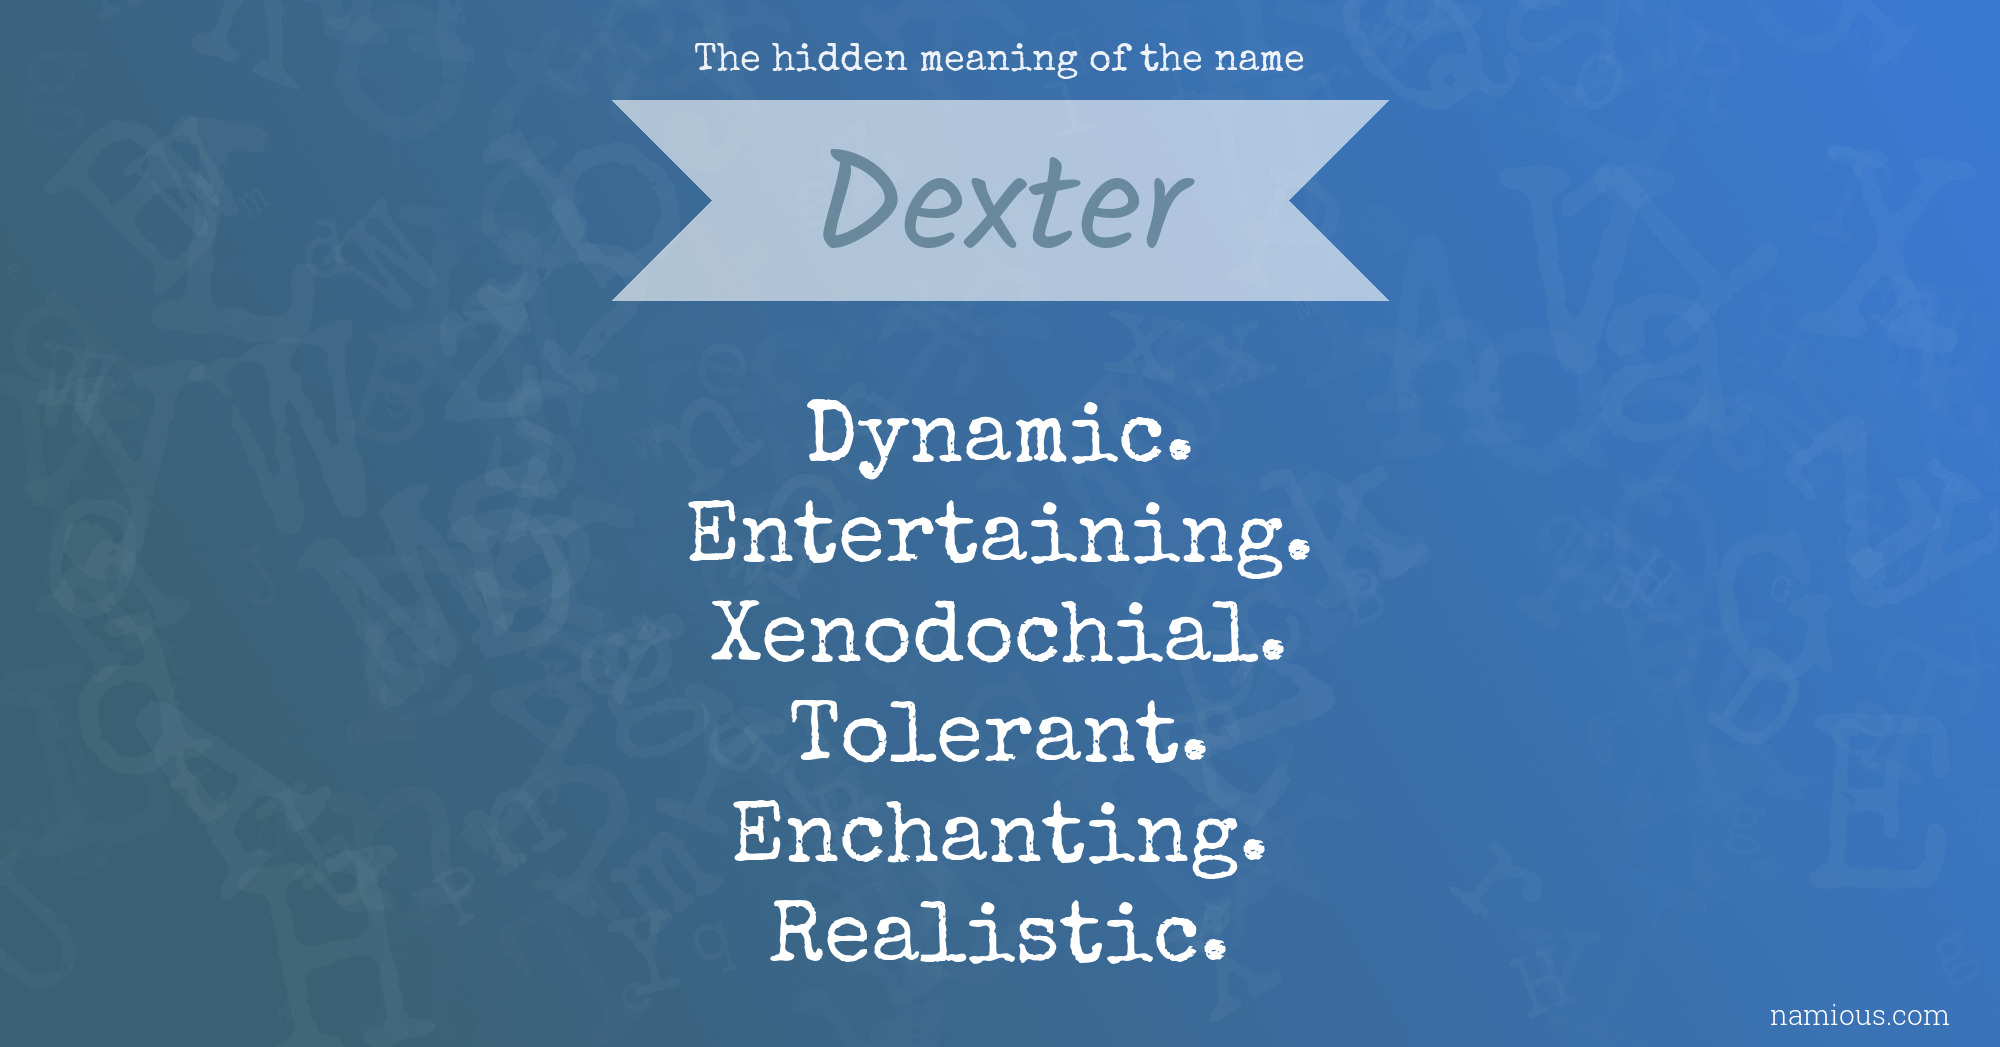 The hidden meaning of the name Dexter